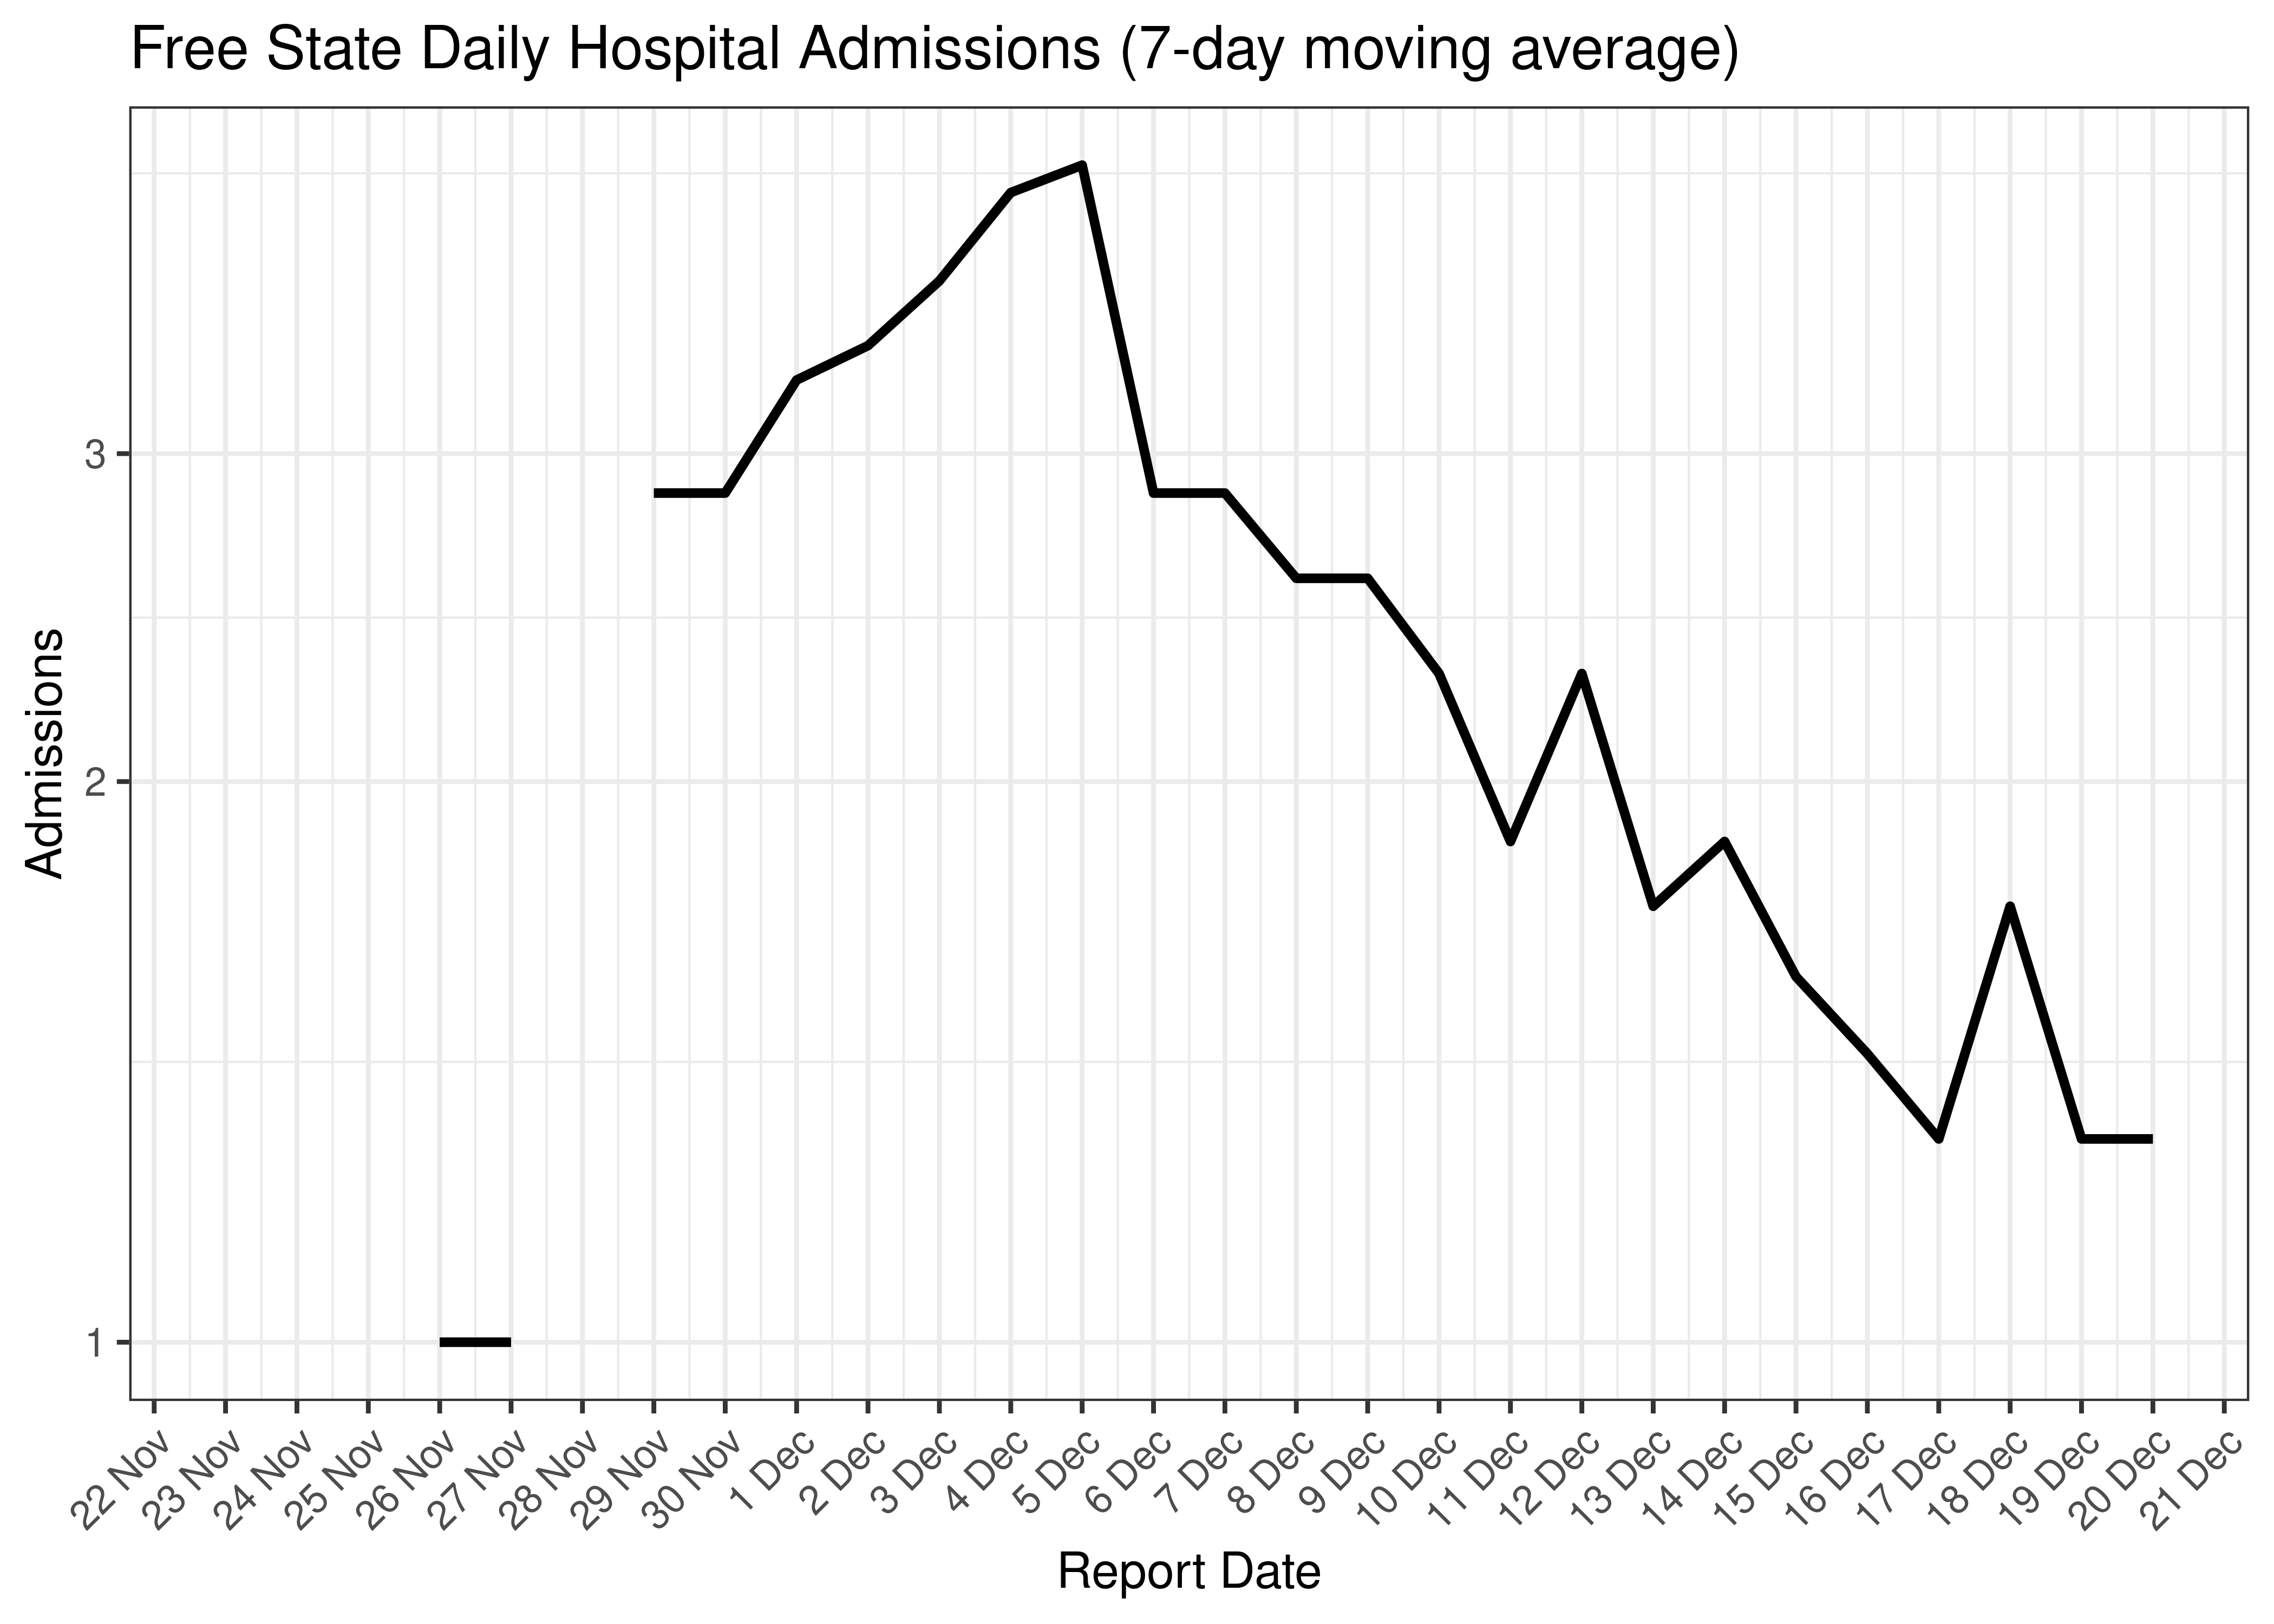 Free State Daily Hospital Admissions for Last 30-days (7-day moving average)